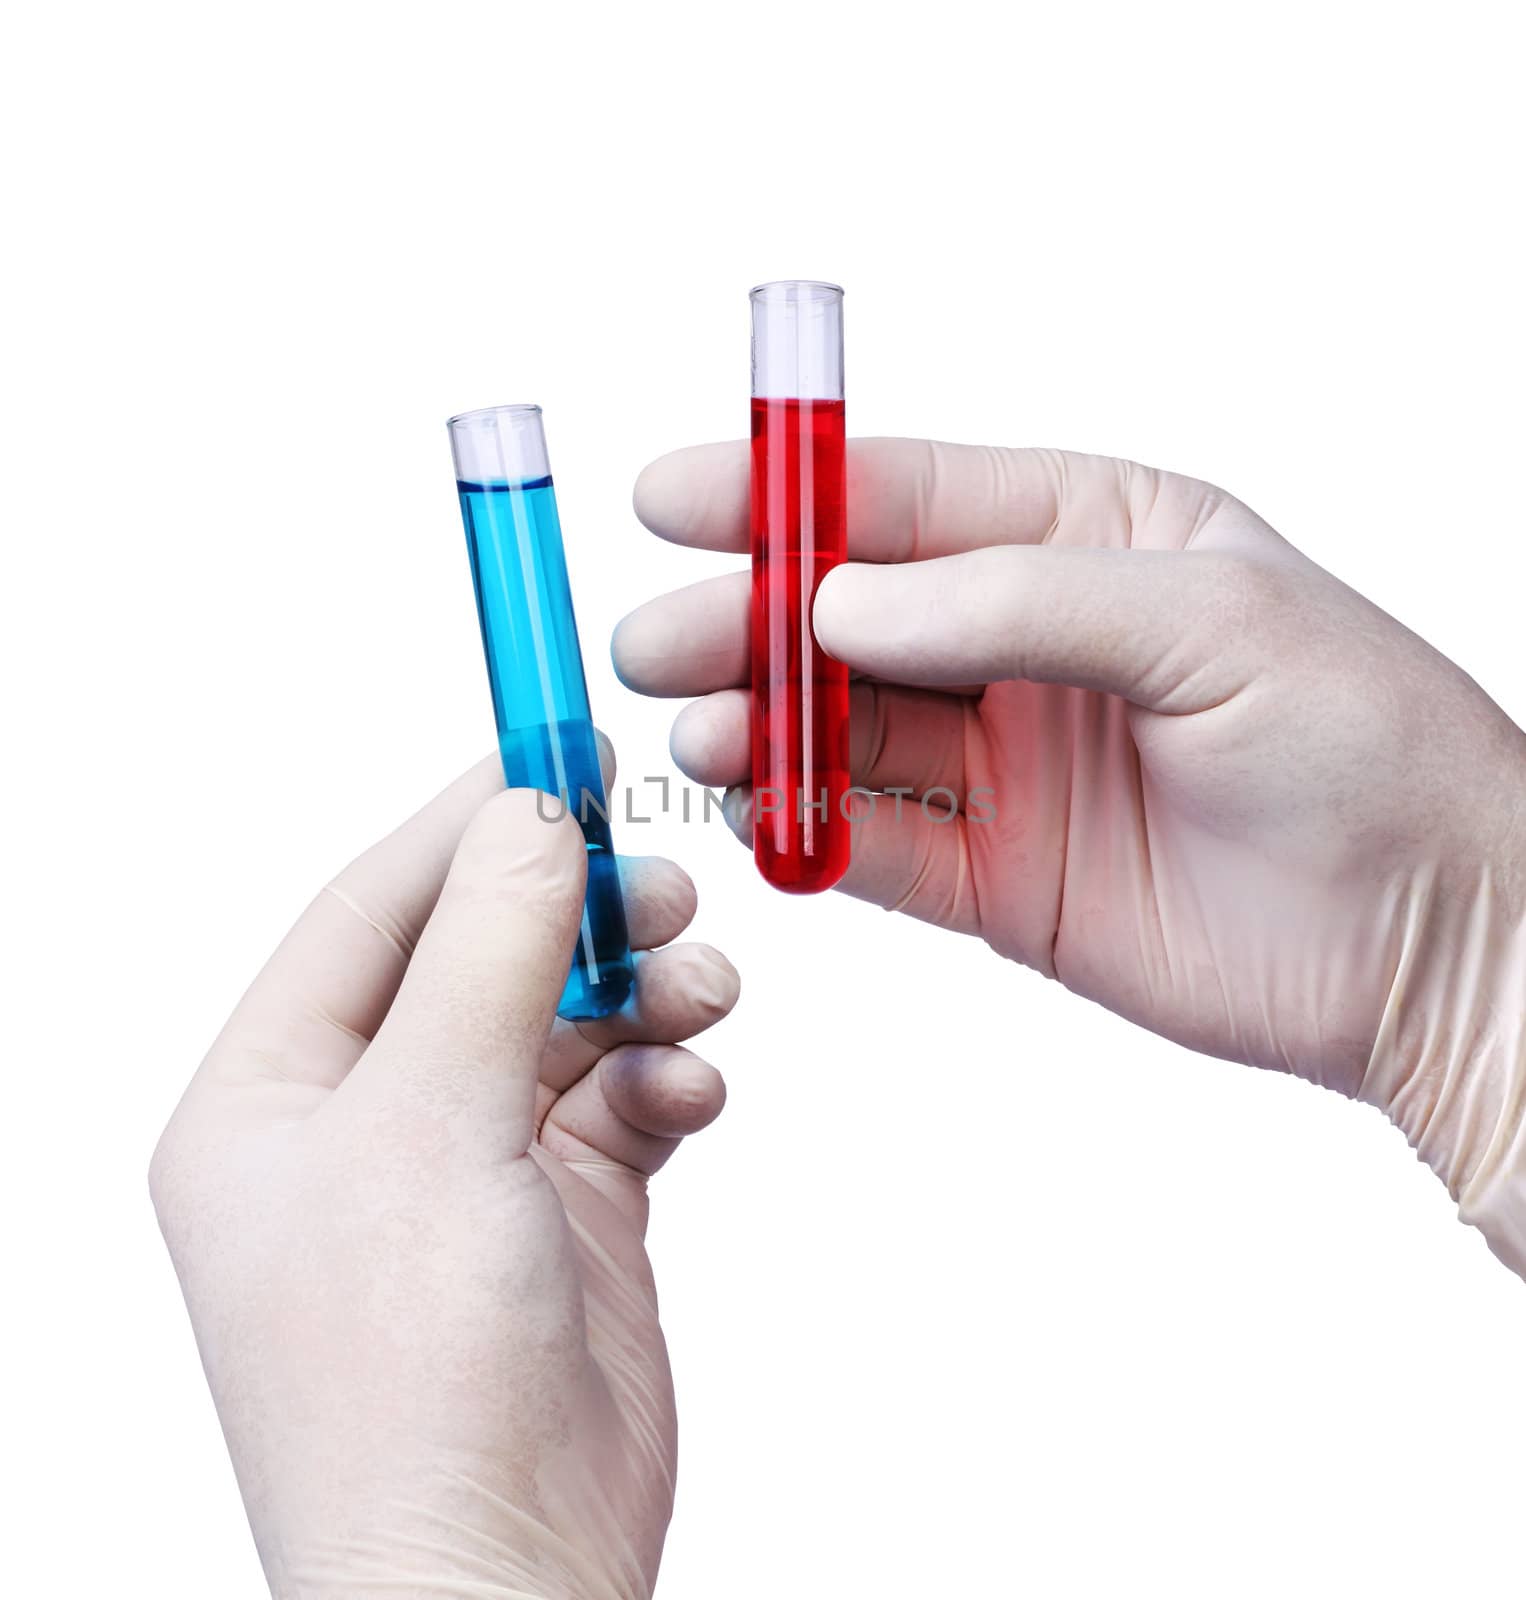 Chemist hands holding liquids in test tubes, isolated on white